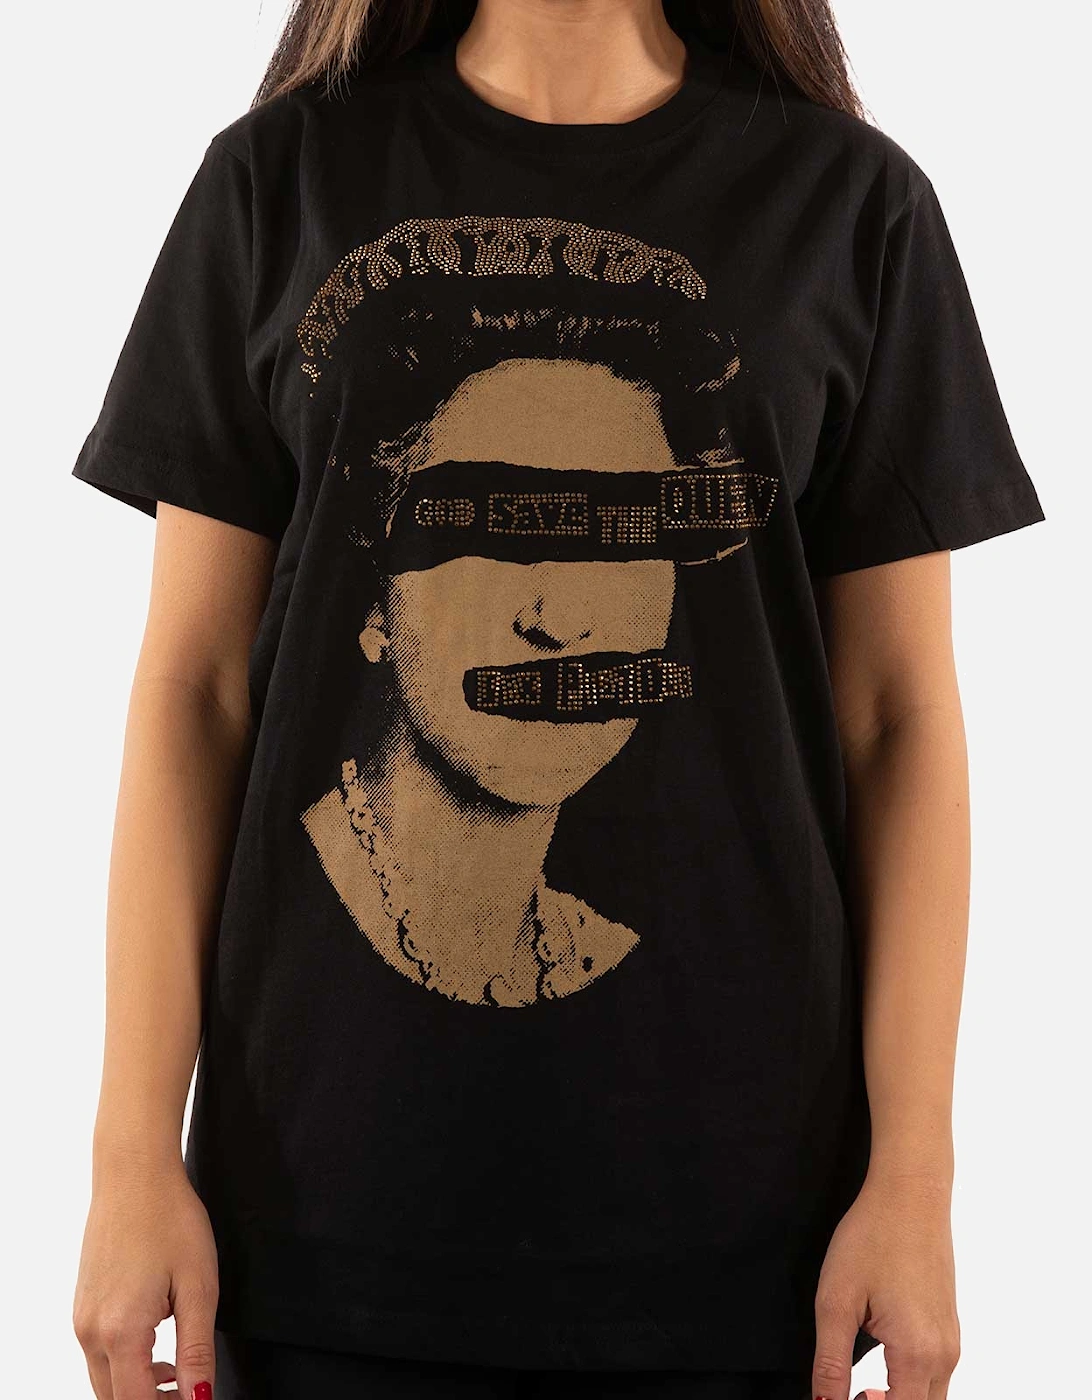 Unisex Adult God Save The Queen Embellished T-Shirt